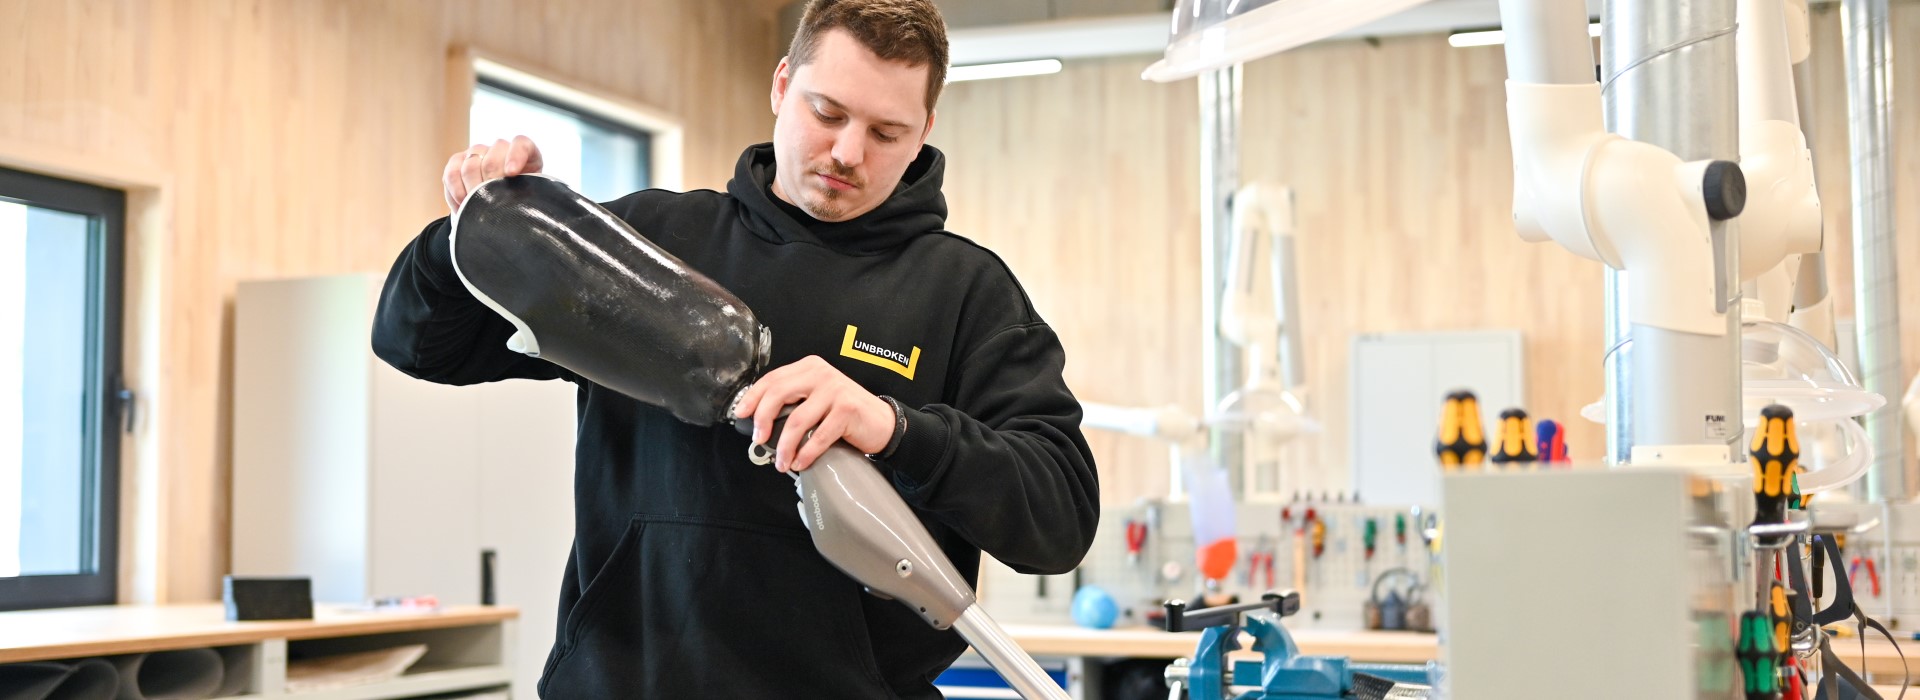 A man is working on a prosthetic leg.